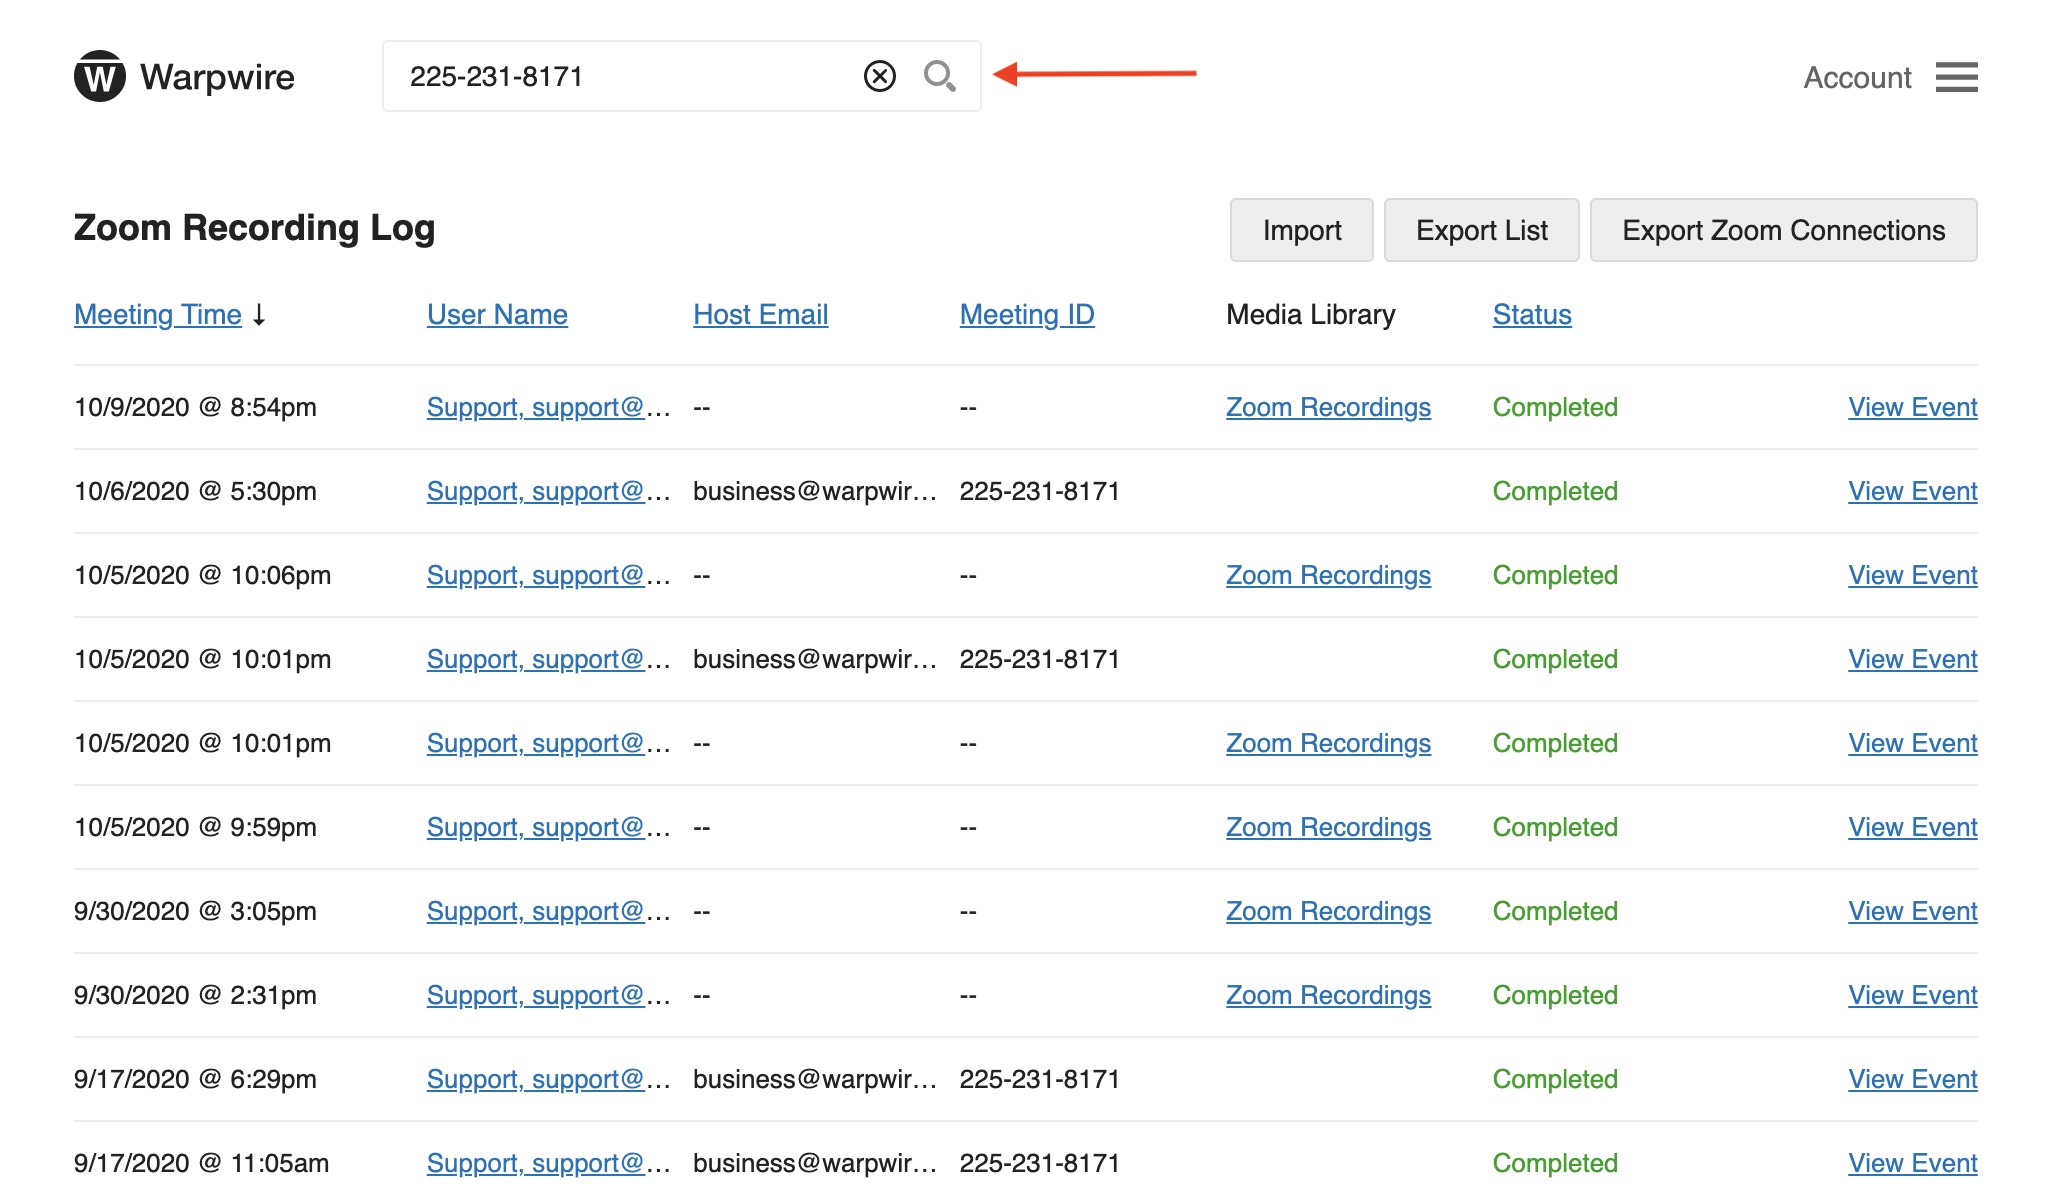 Search results for specific Meeting ID within the Zoom Recording Log on Warpwire